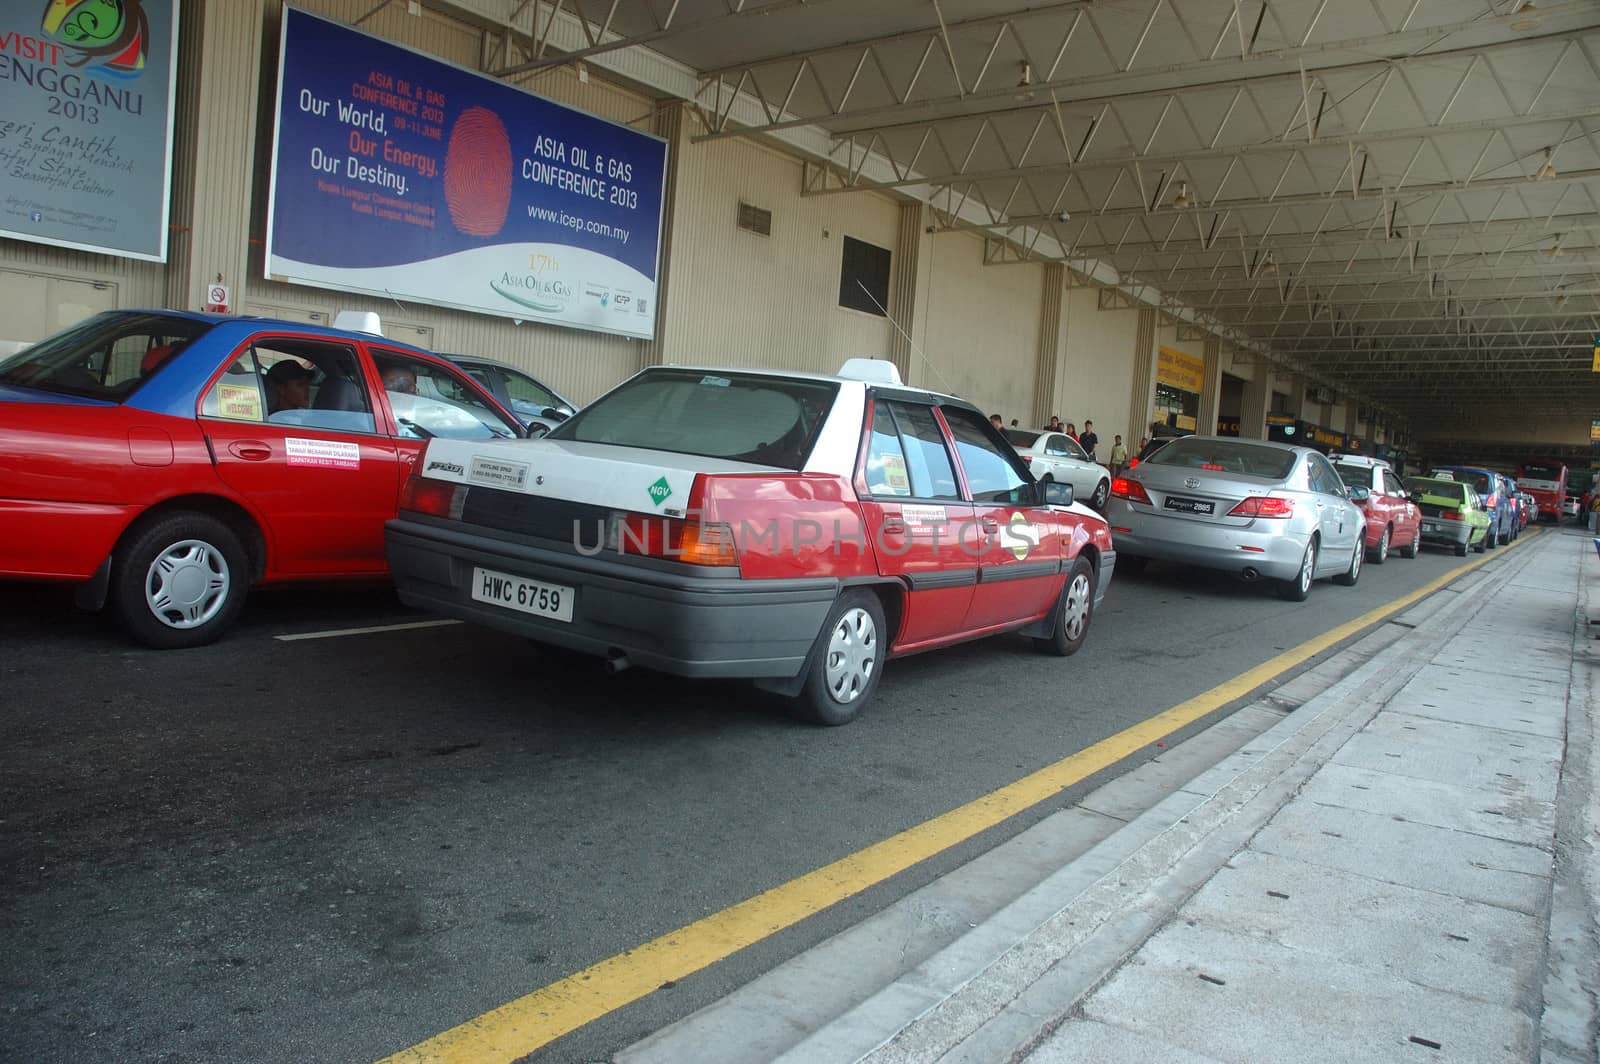 KLCCT, Malaysia - June 7, 2013: Red colored taxi that operated in Kuala Lumpur Low Cost Carrier Terminal (KLCCT), Malaysia.